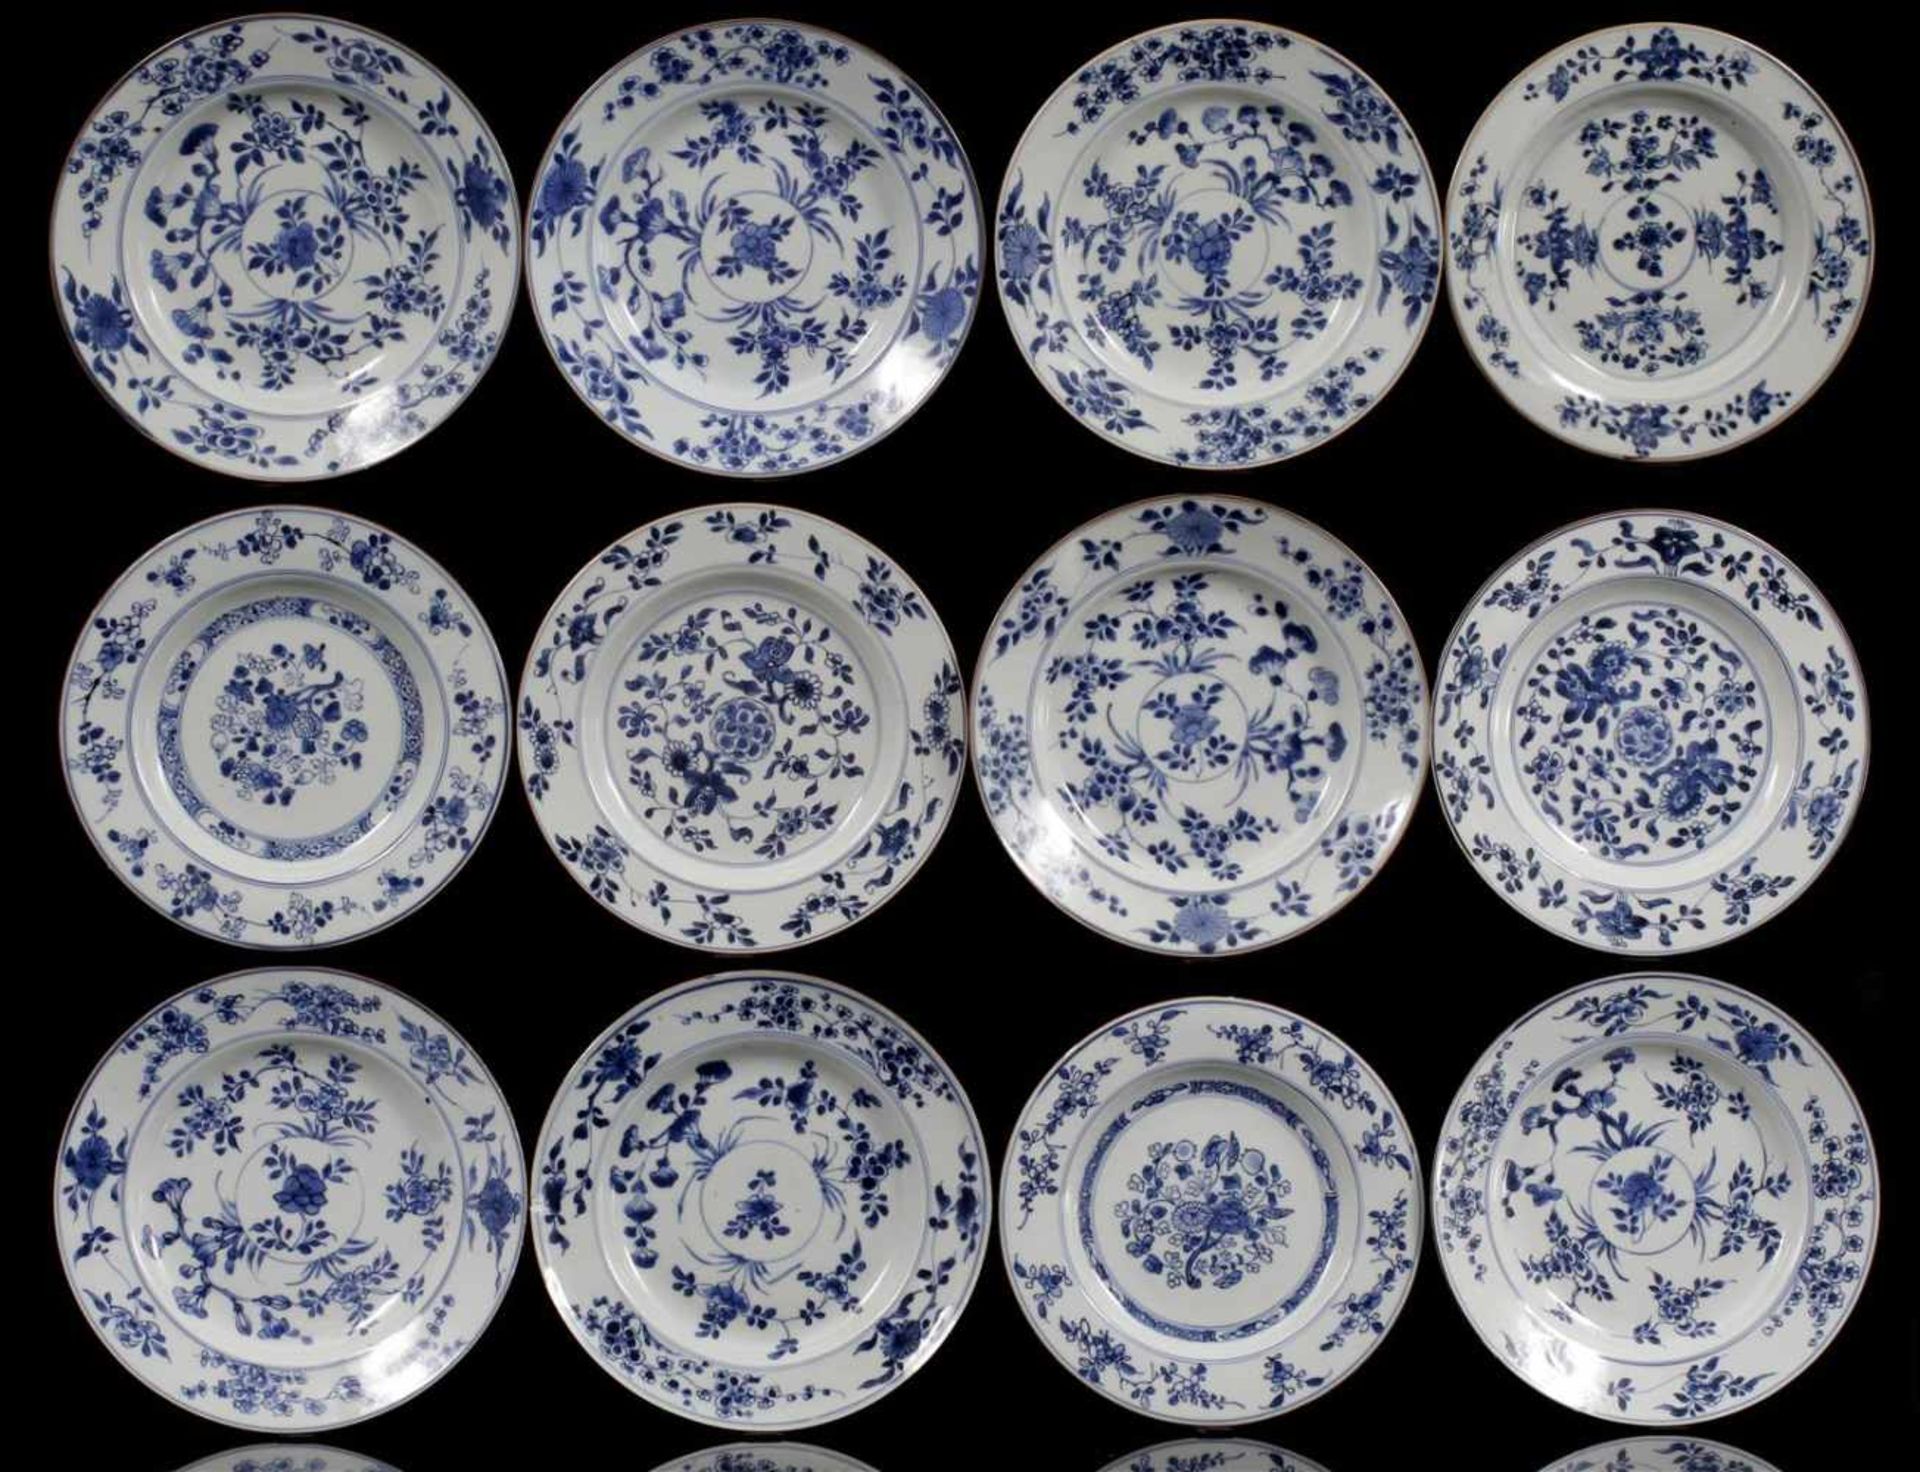 12 Chinese porcelain saucers with floral decor & nbsp; in various designs, late 18th century, 21.5-